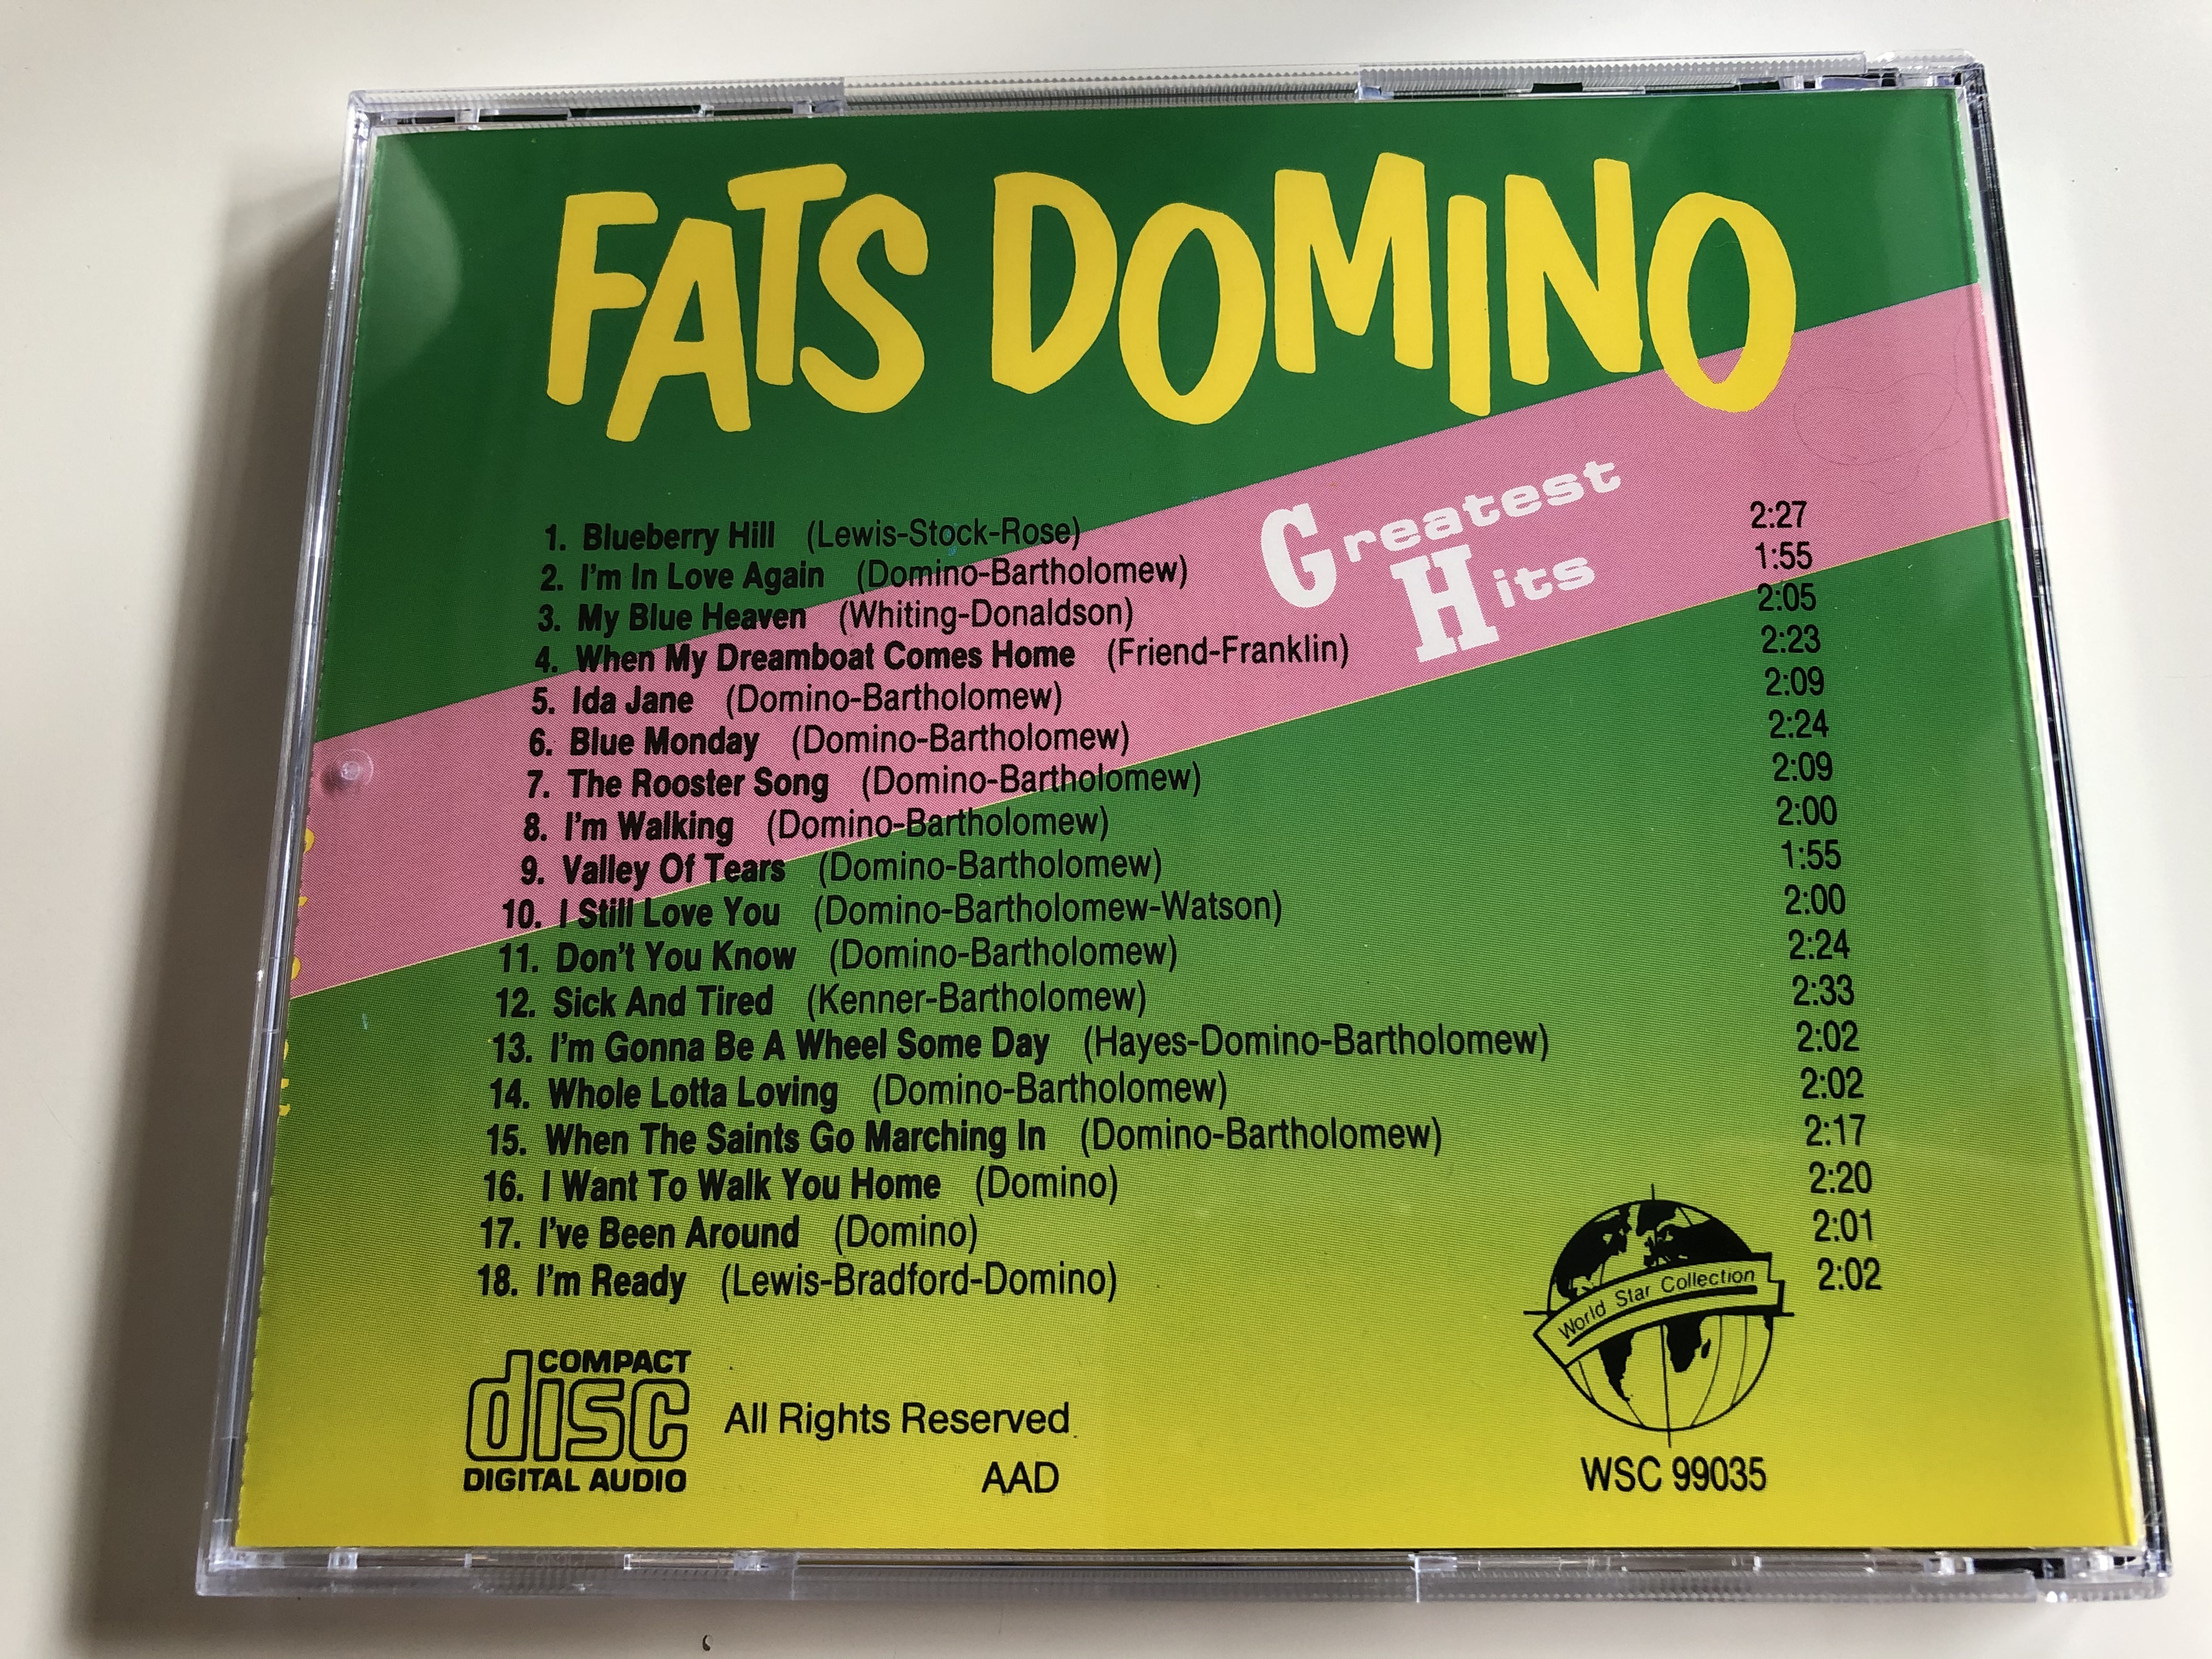 fats-domino-greatest-hits-blue-monday-when-the-saints-go-marching-in-blueberry-hill-i-m-walking-world-star-collection-audio-cd-wsc-99035-4-.jpg